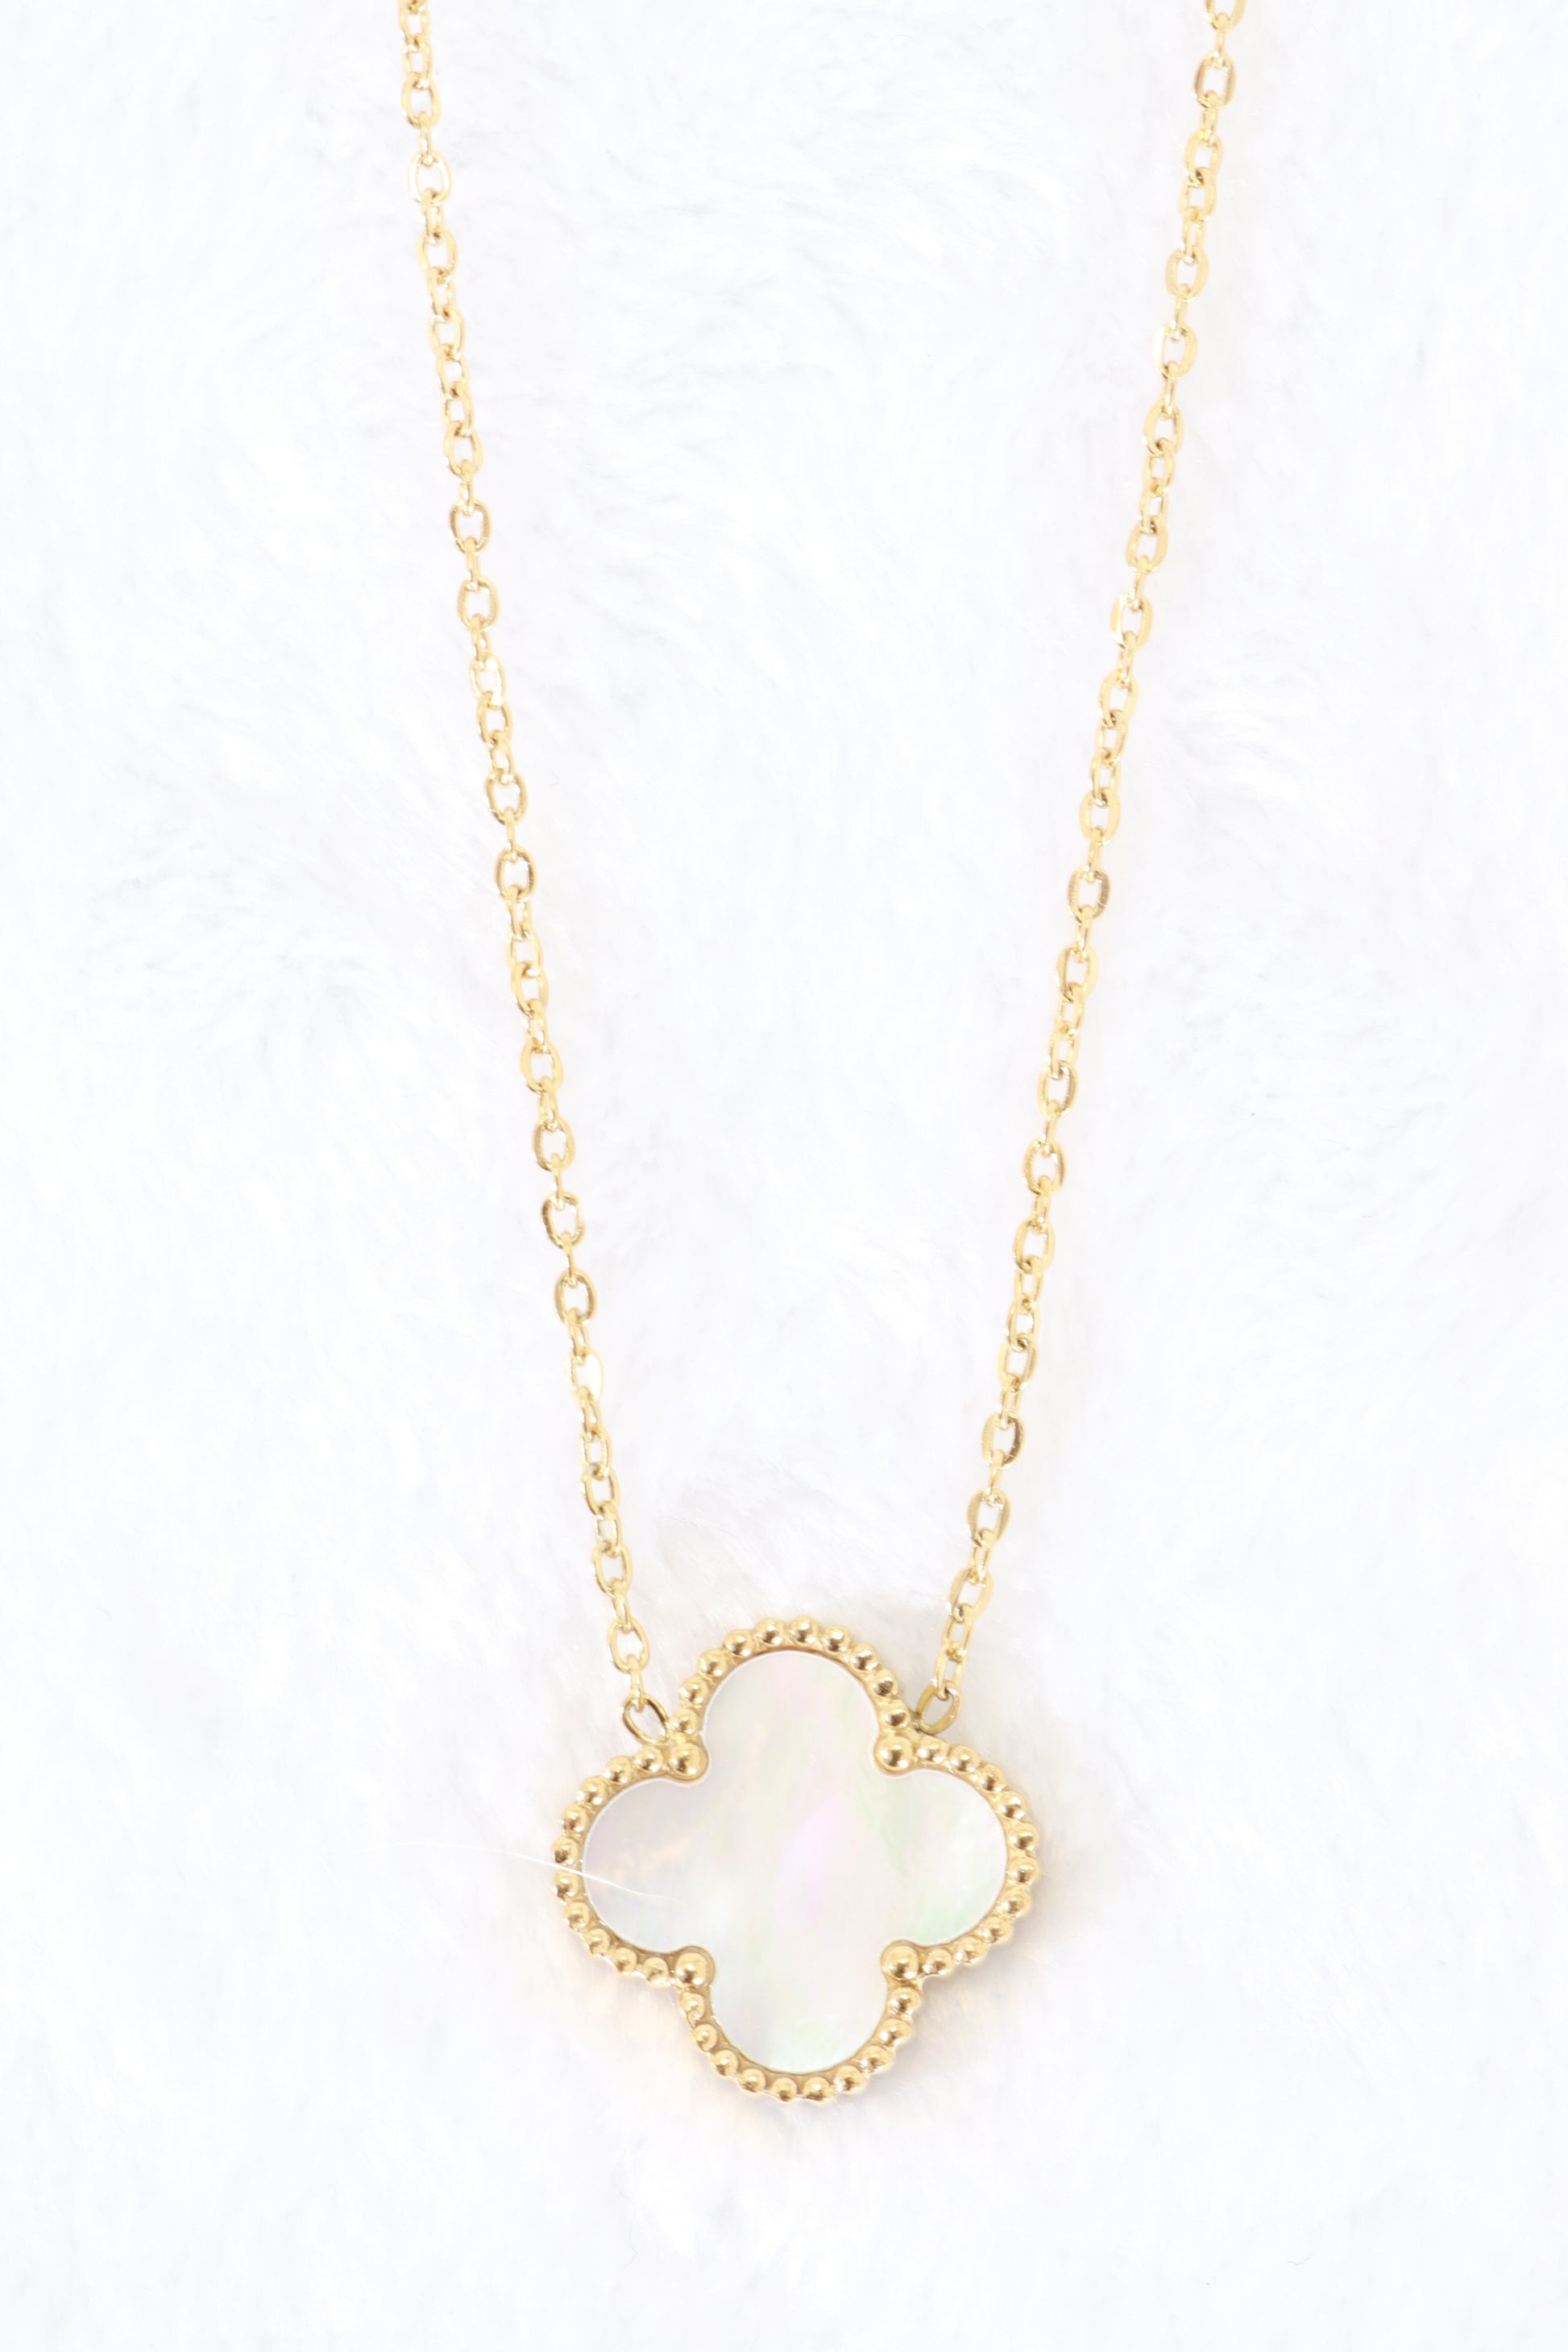 FWRD Renew Chanel Coco Clover Necklace in Gold